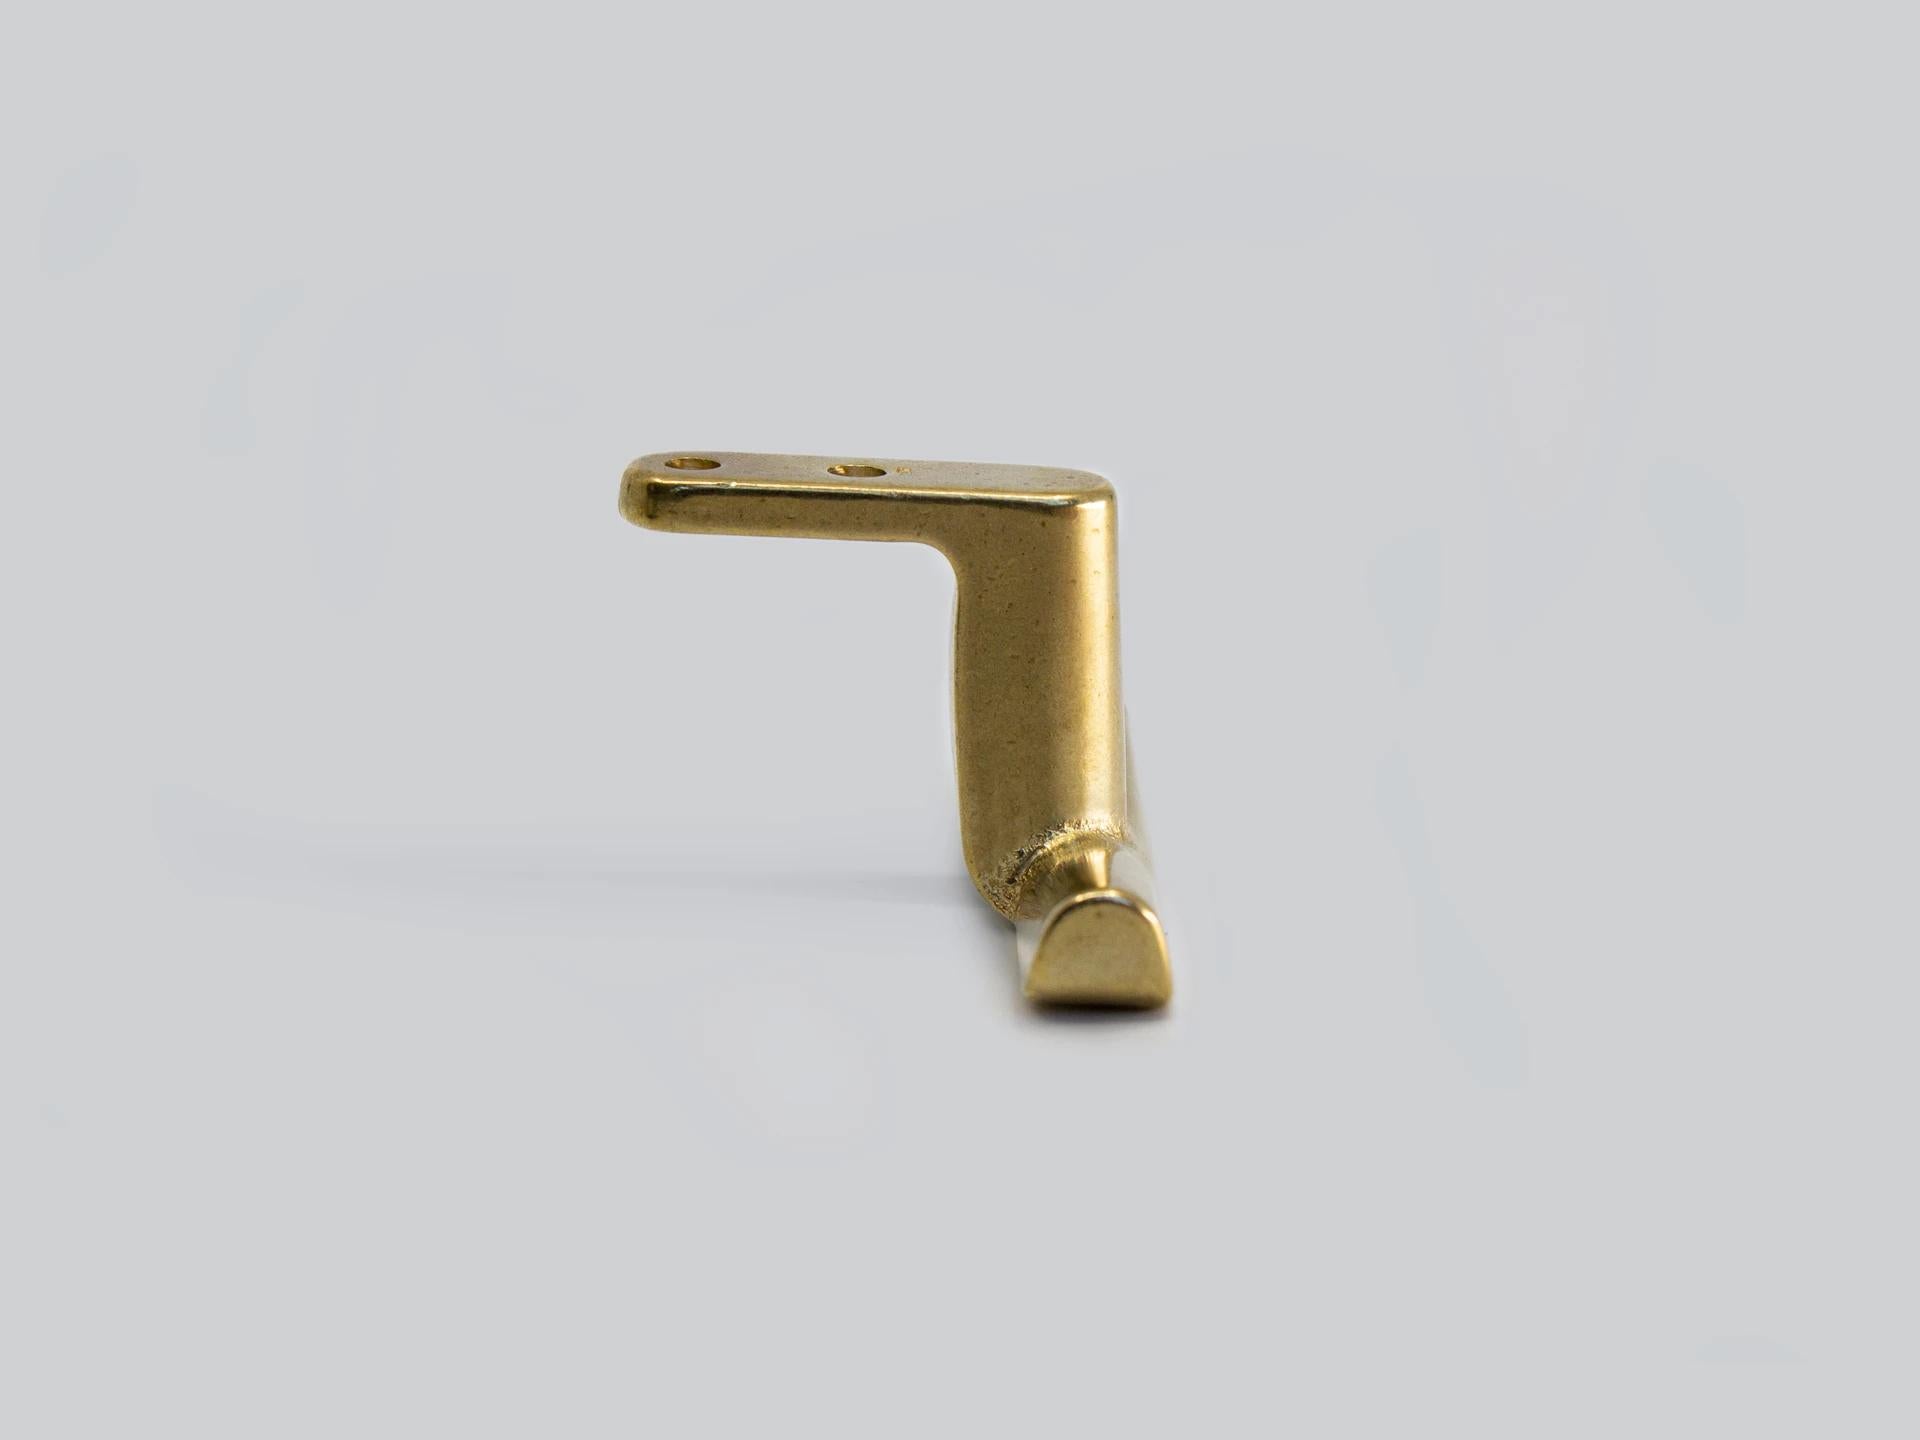 Bronze bag hook by Henry Wilson
Designed for hanging bags and coats under bar counters, the counter hook measures 35 x 62 x 45mm. Sand cast in brass and rumble finished.

Manufactured in small batches so slight variations will occur from piece to